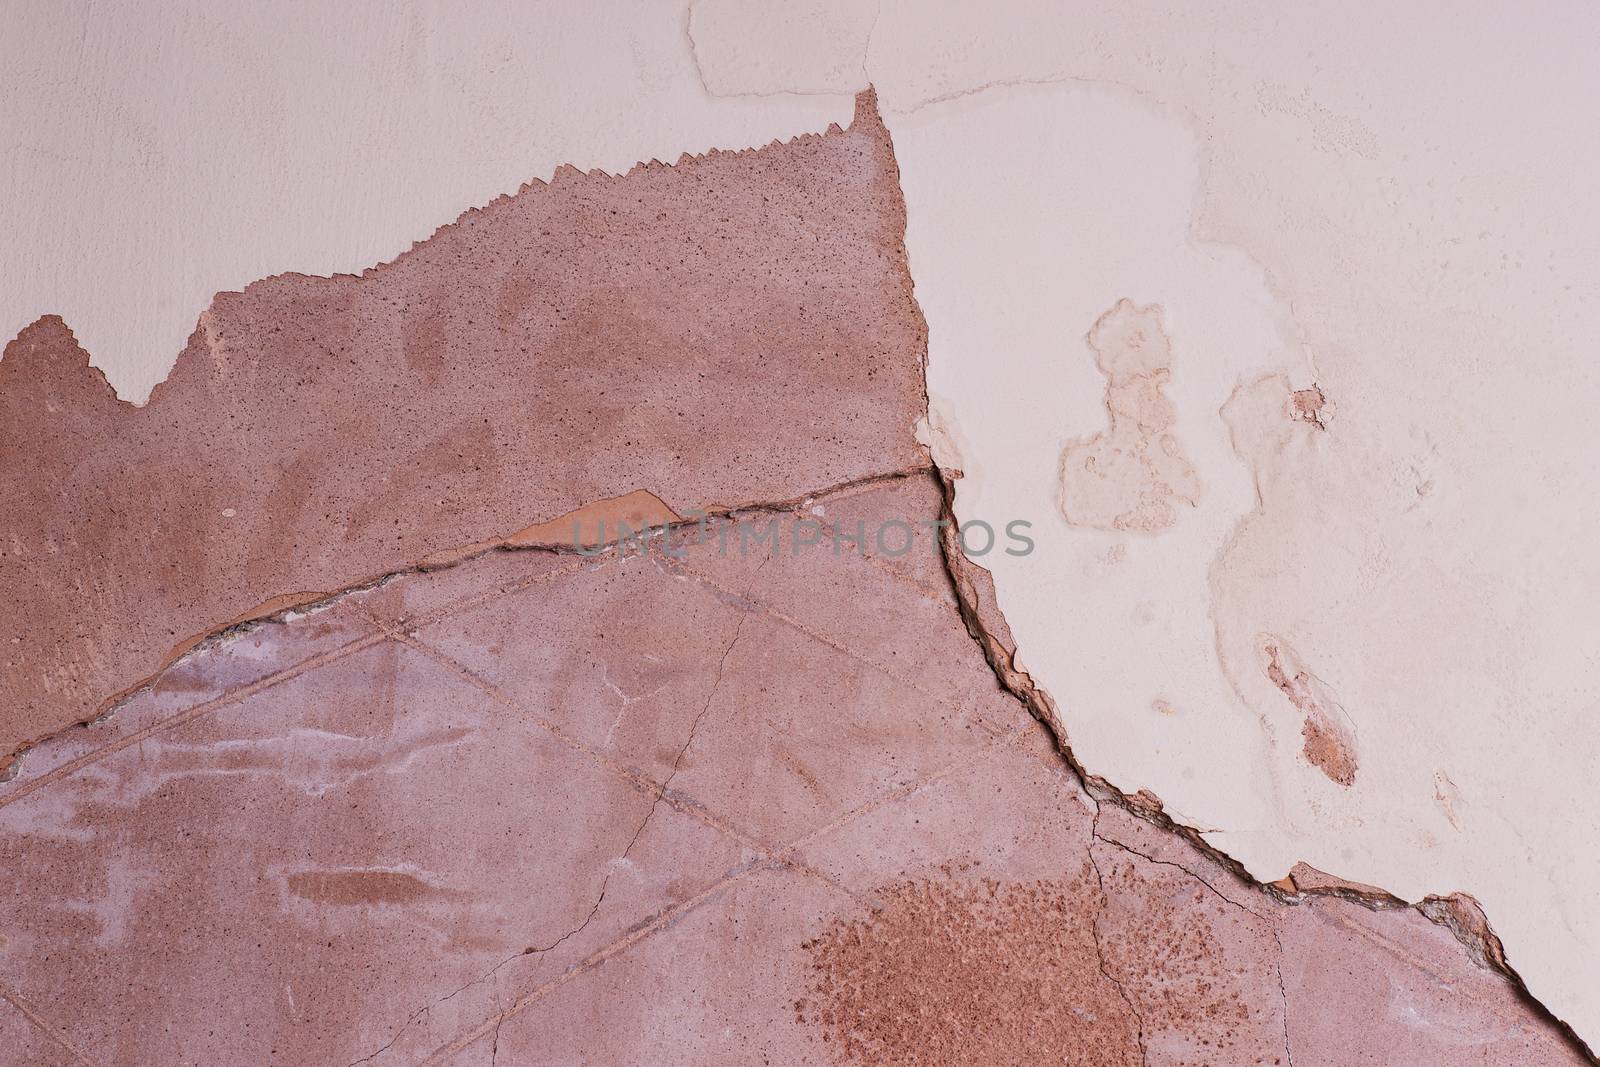 interior wall showing cracked and damaged plaster due to damp